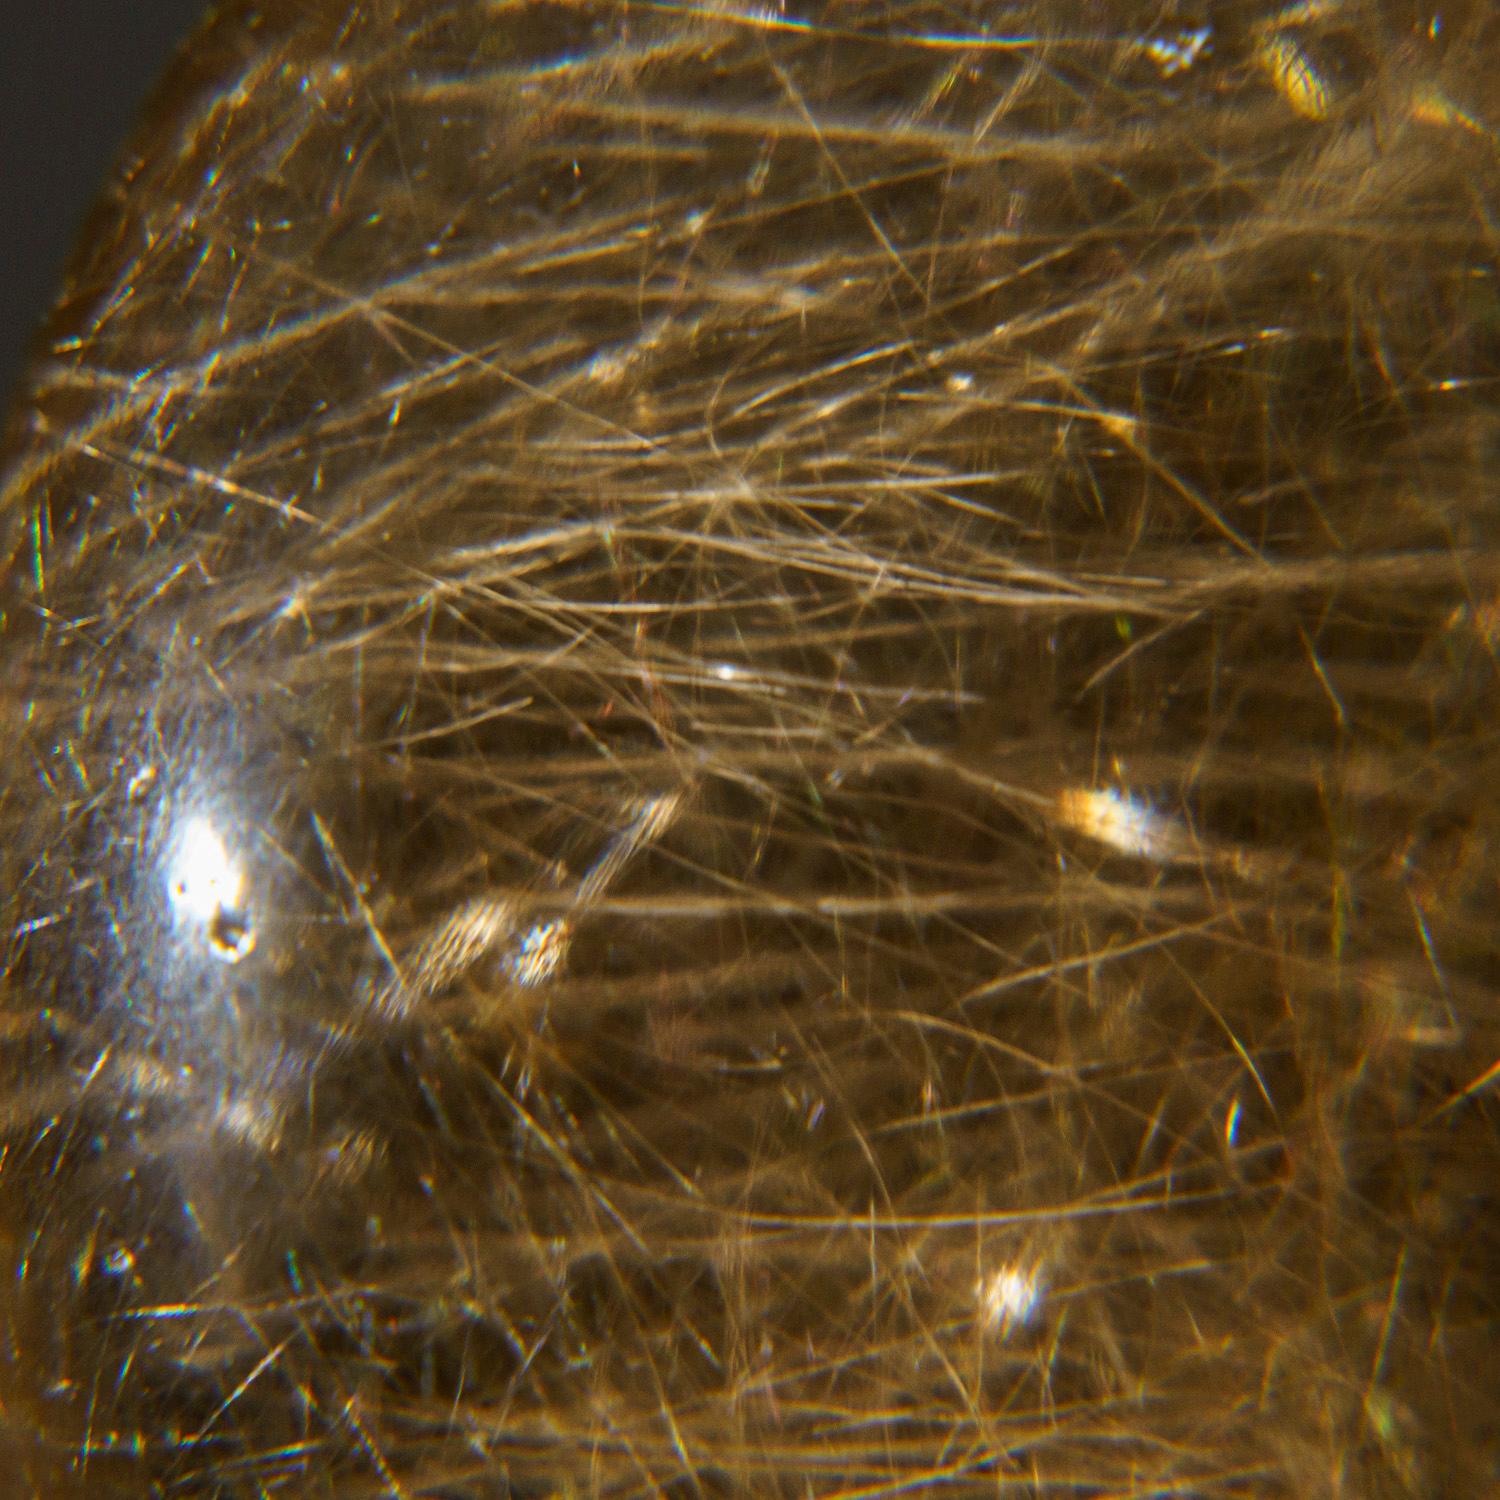 Other Genuine Polished Rutile Smoky Quartz Egg from Brazil (221.9 grams) For Sale